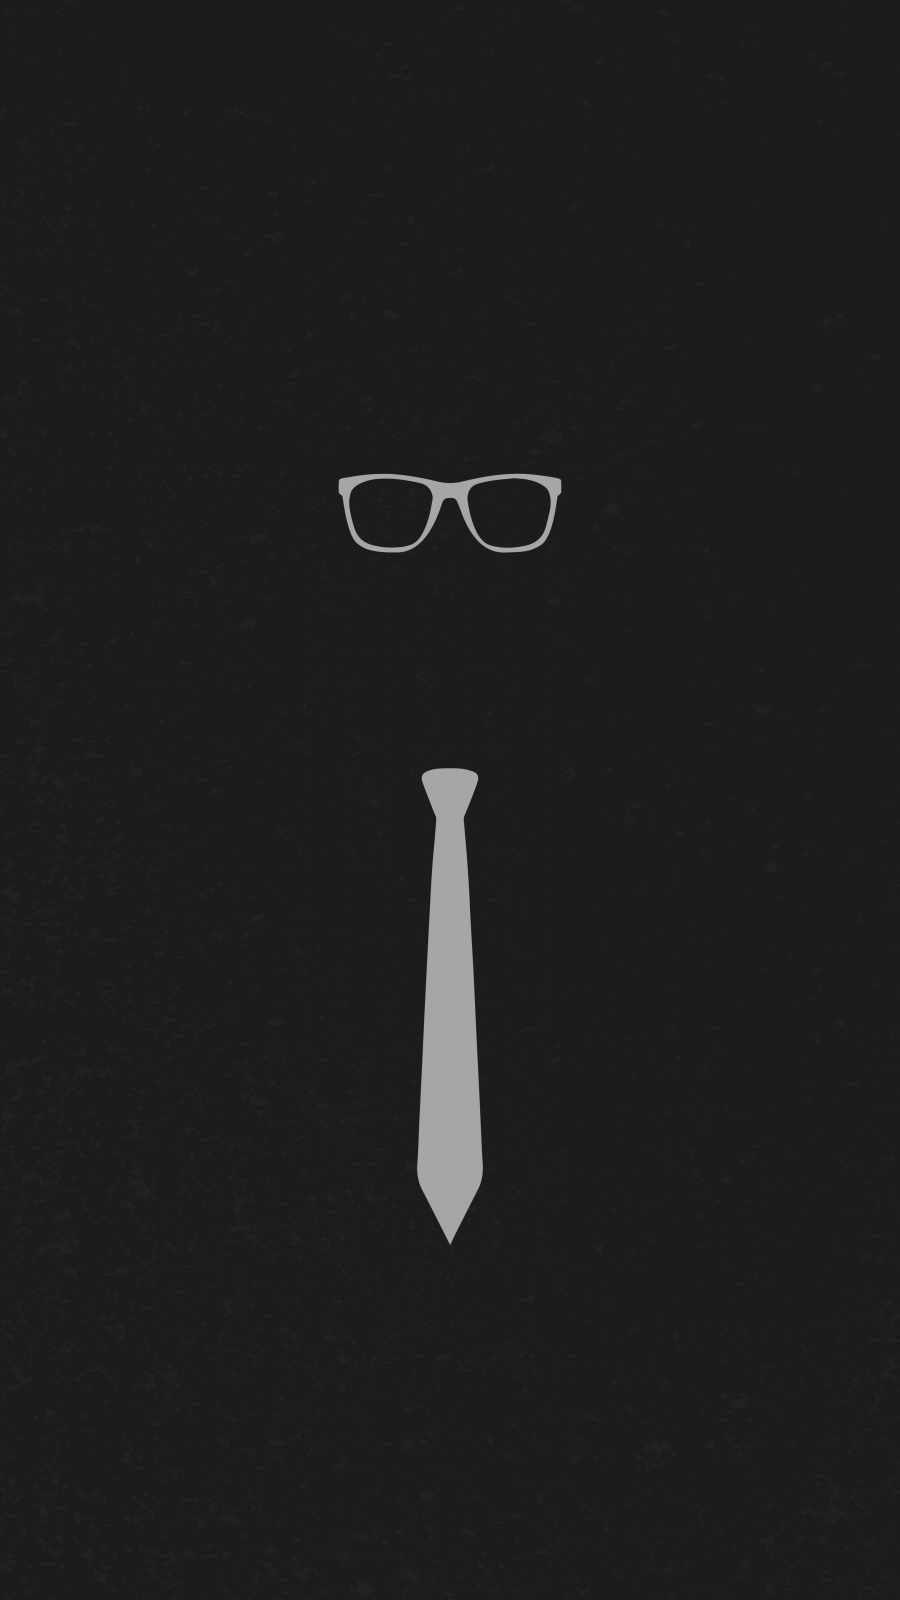 Glasses Iphone Wallpapers